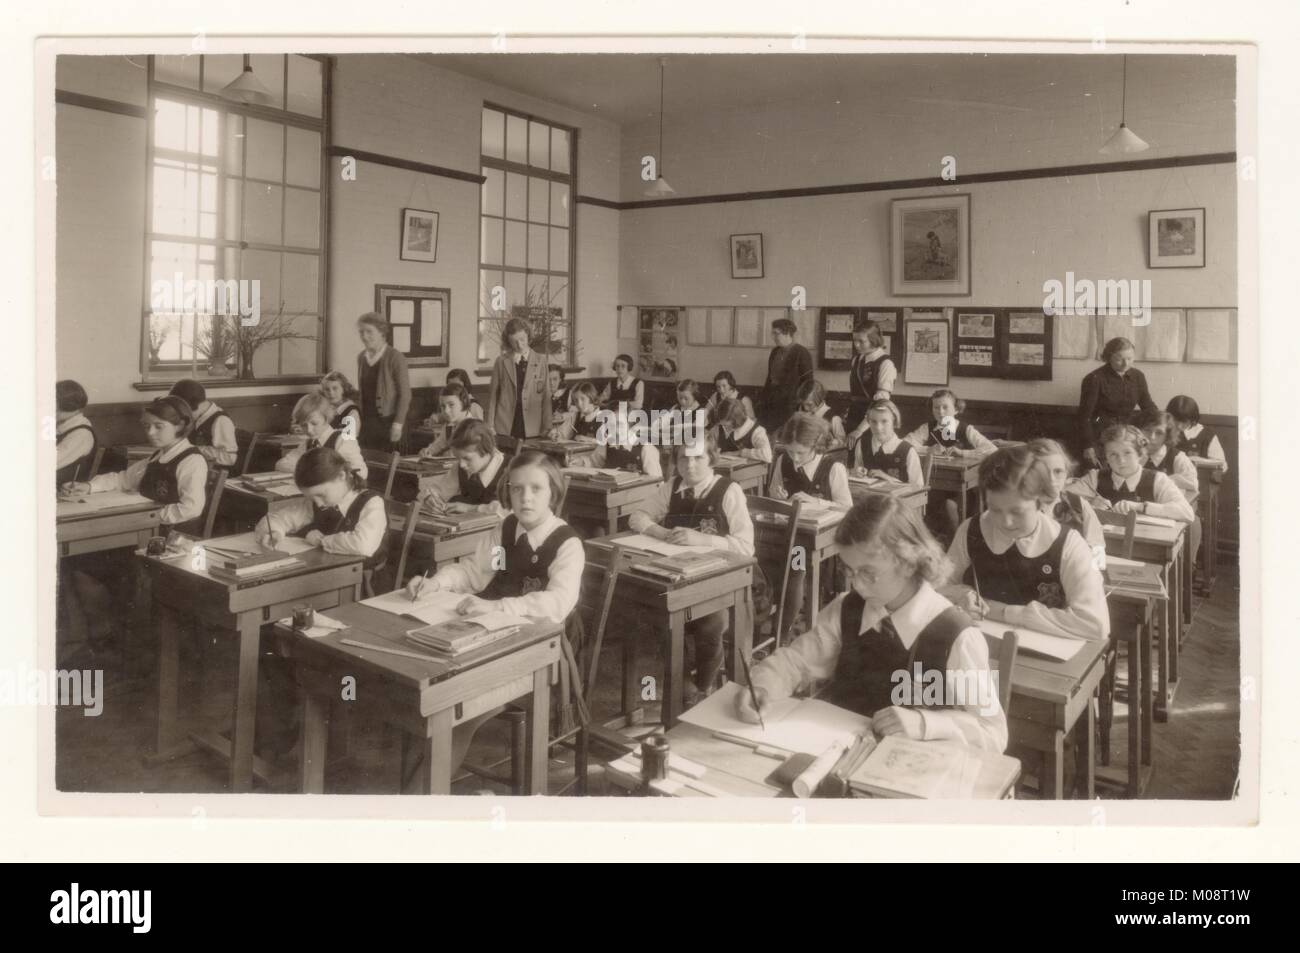 Postcard photograph of school classroom of girls writing at desks using pen and ink from an ink pot, with teachers and class monitors helping, circa 1930s, U.K. Stock Photo